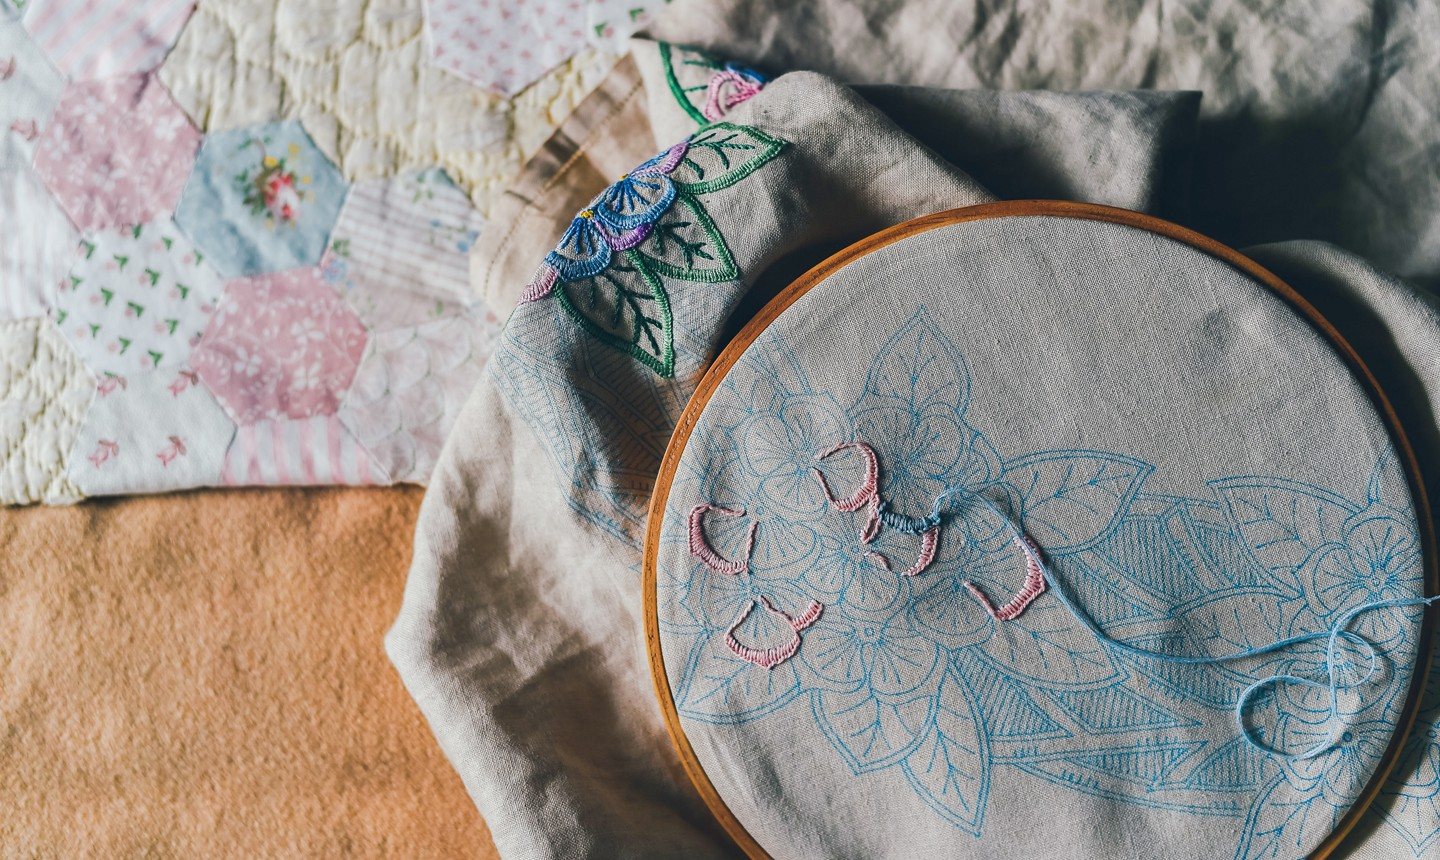 How To Design Embroidery Patterns 5 Simple Ways To Transfer Embroidery Designs